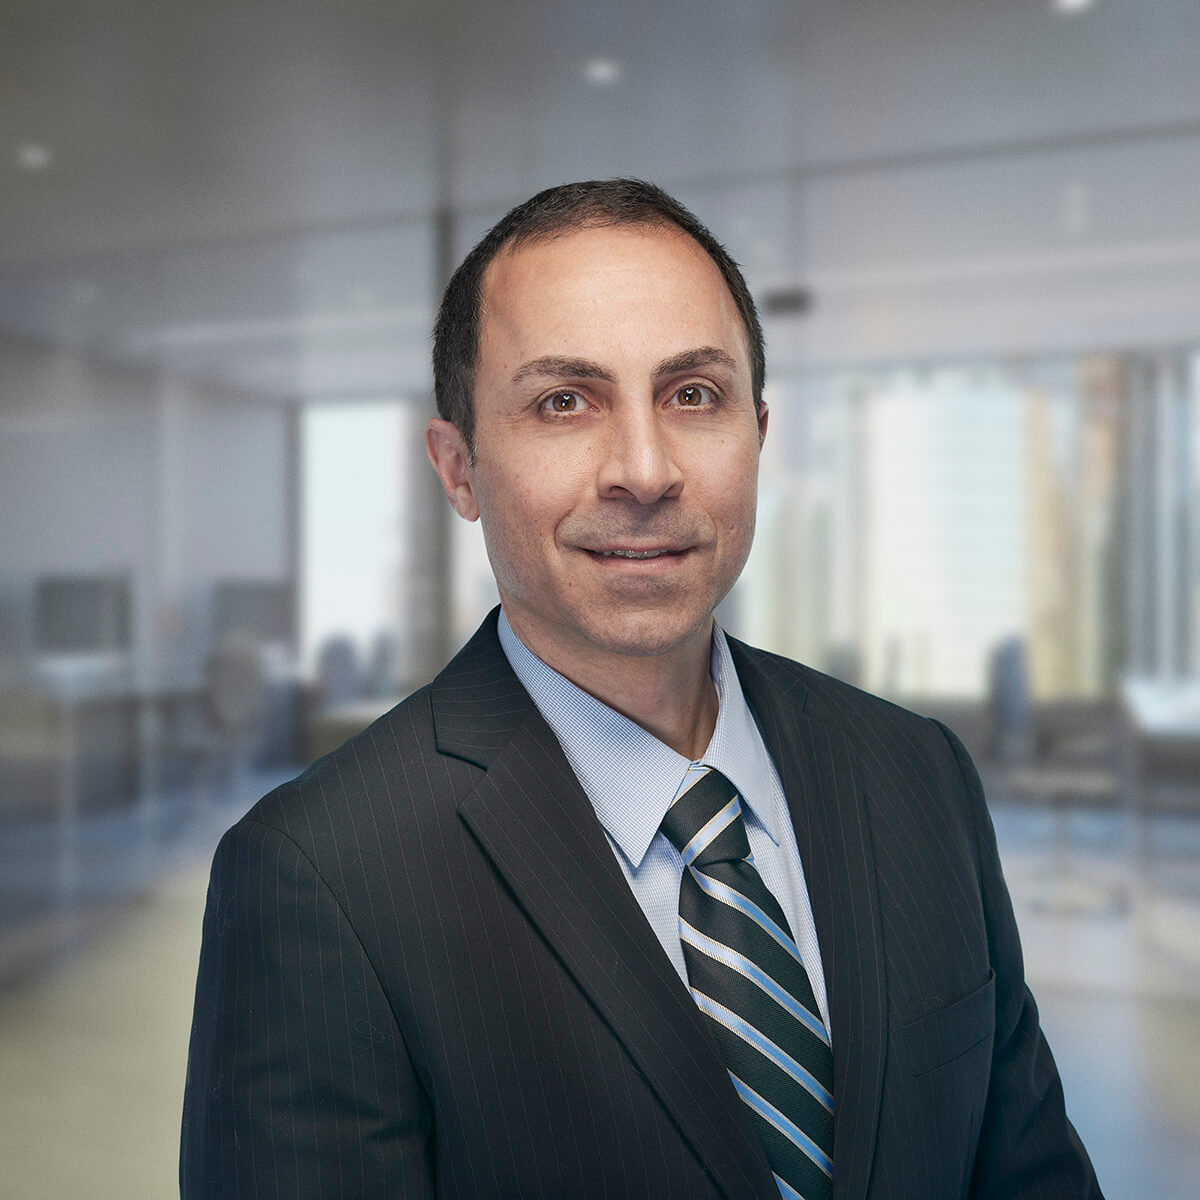 An image of Ryan Kattoo, a principal and co-founder of Keystone Commercial Real Estate.